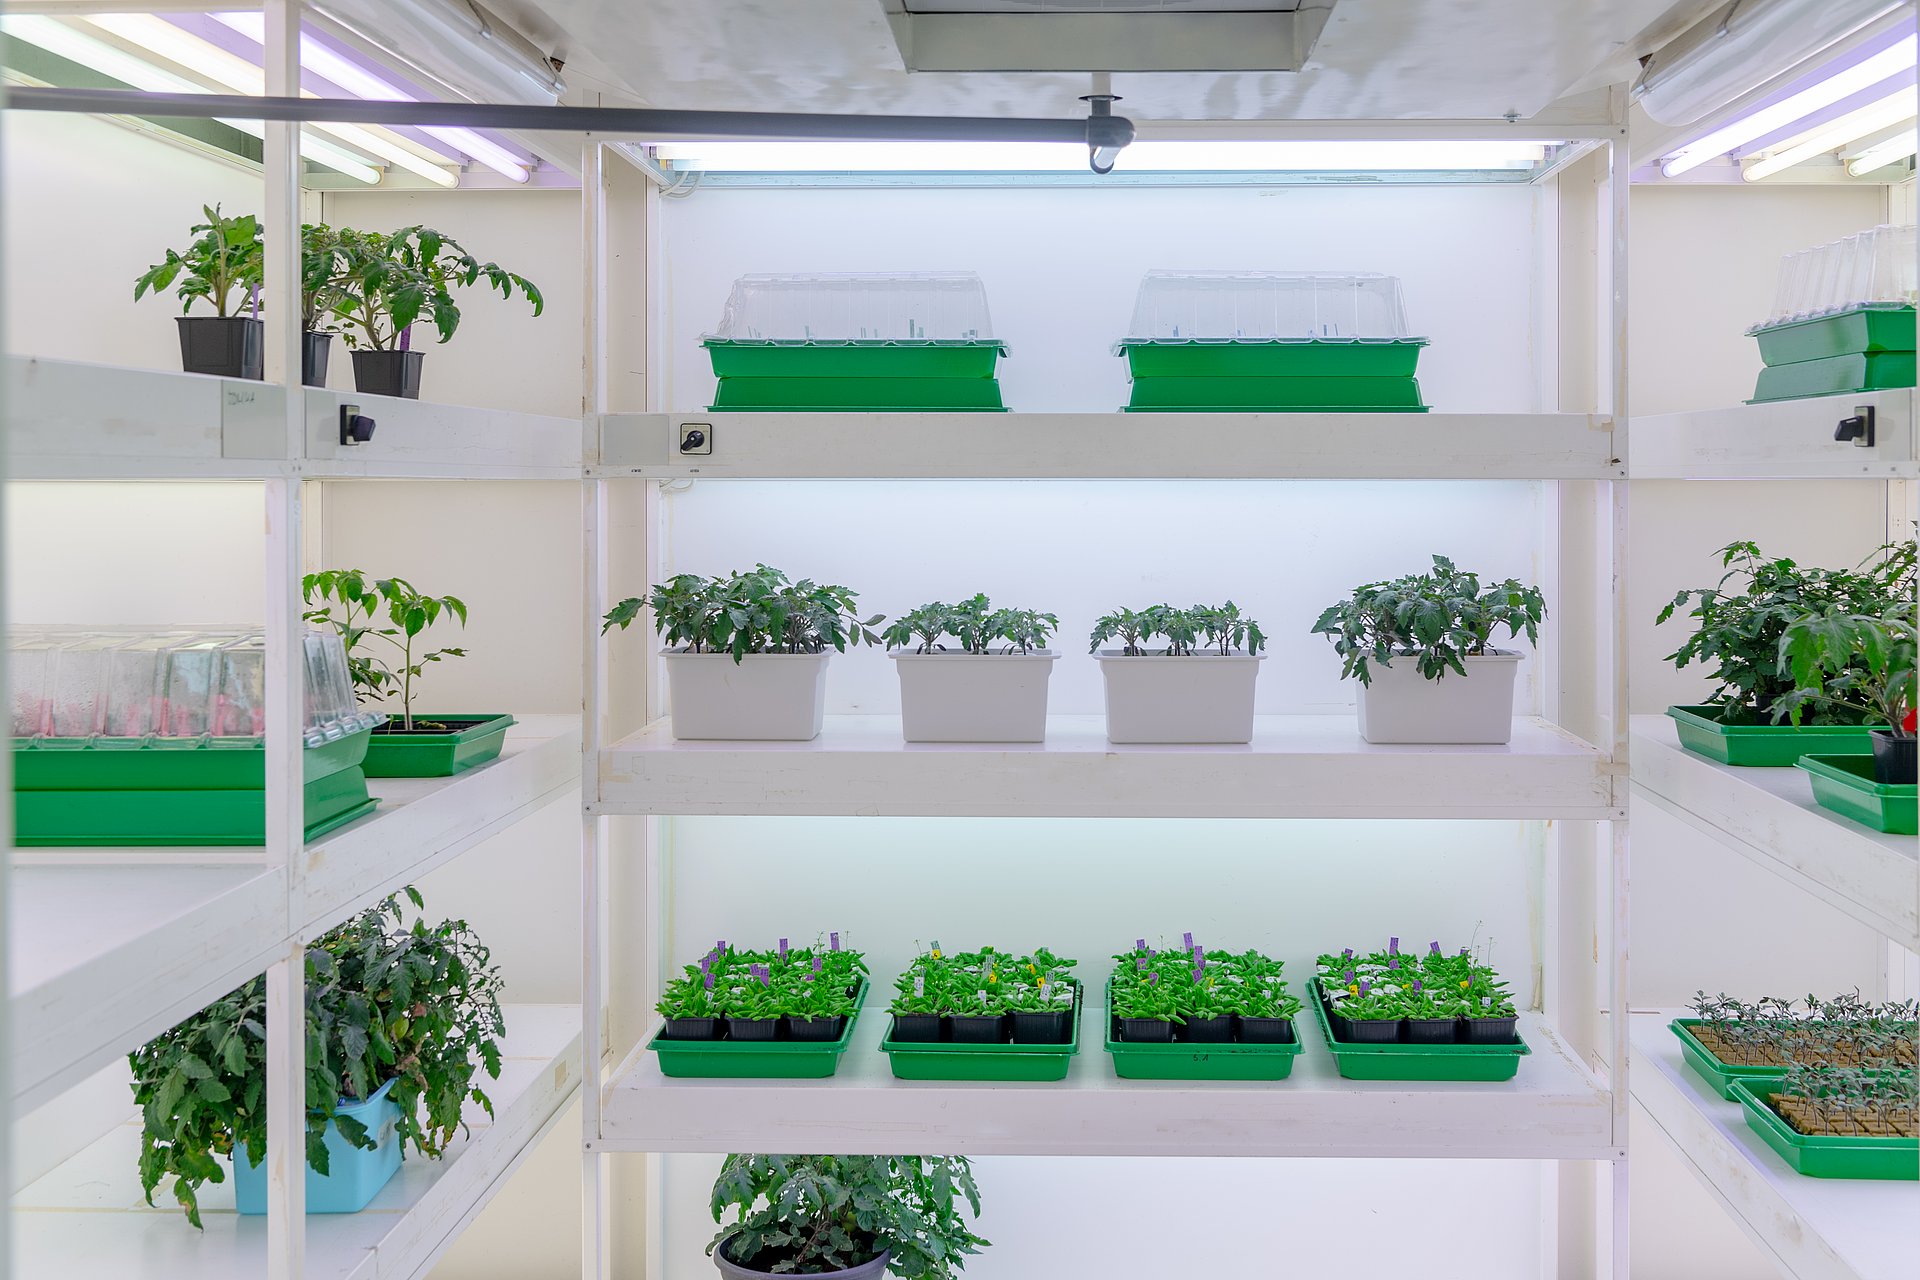 Tomato plants growing in a climate chamber.